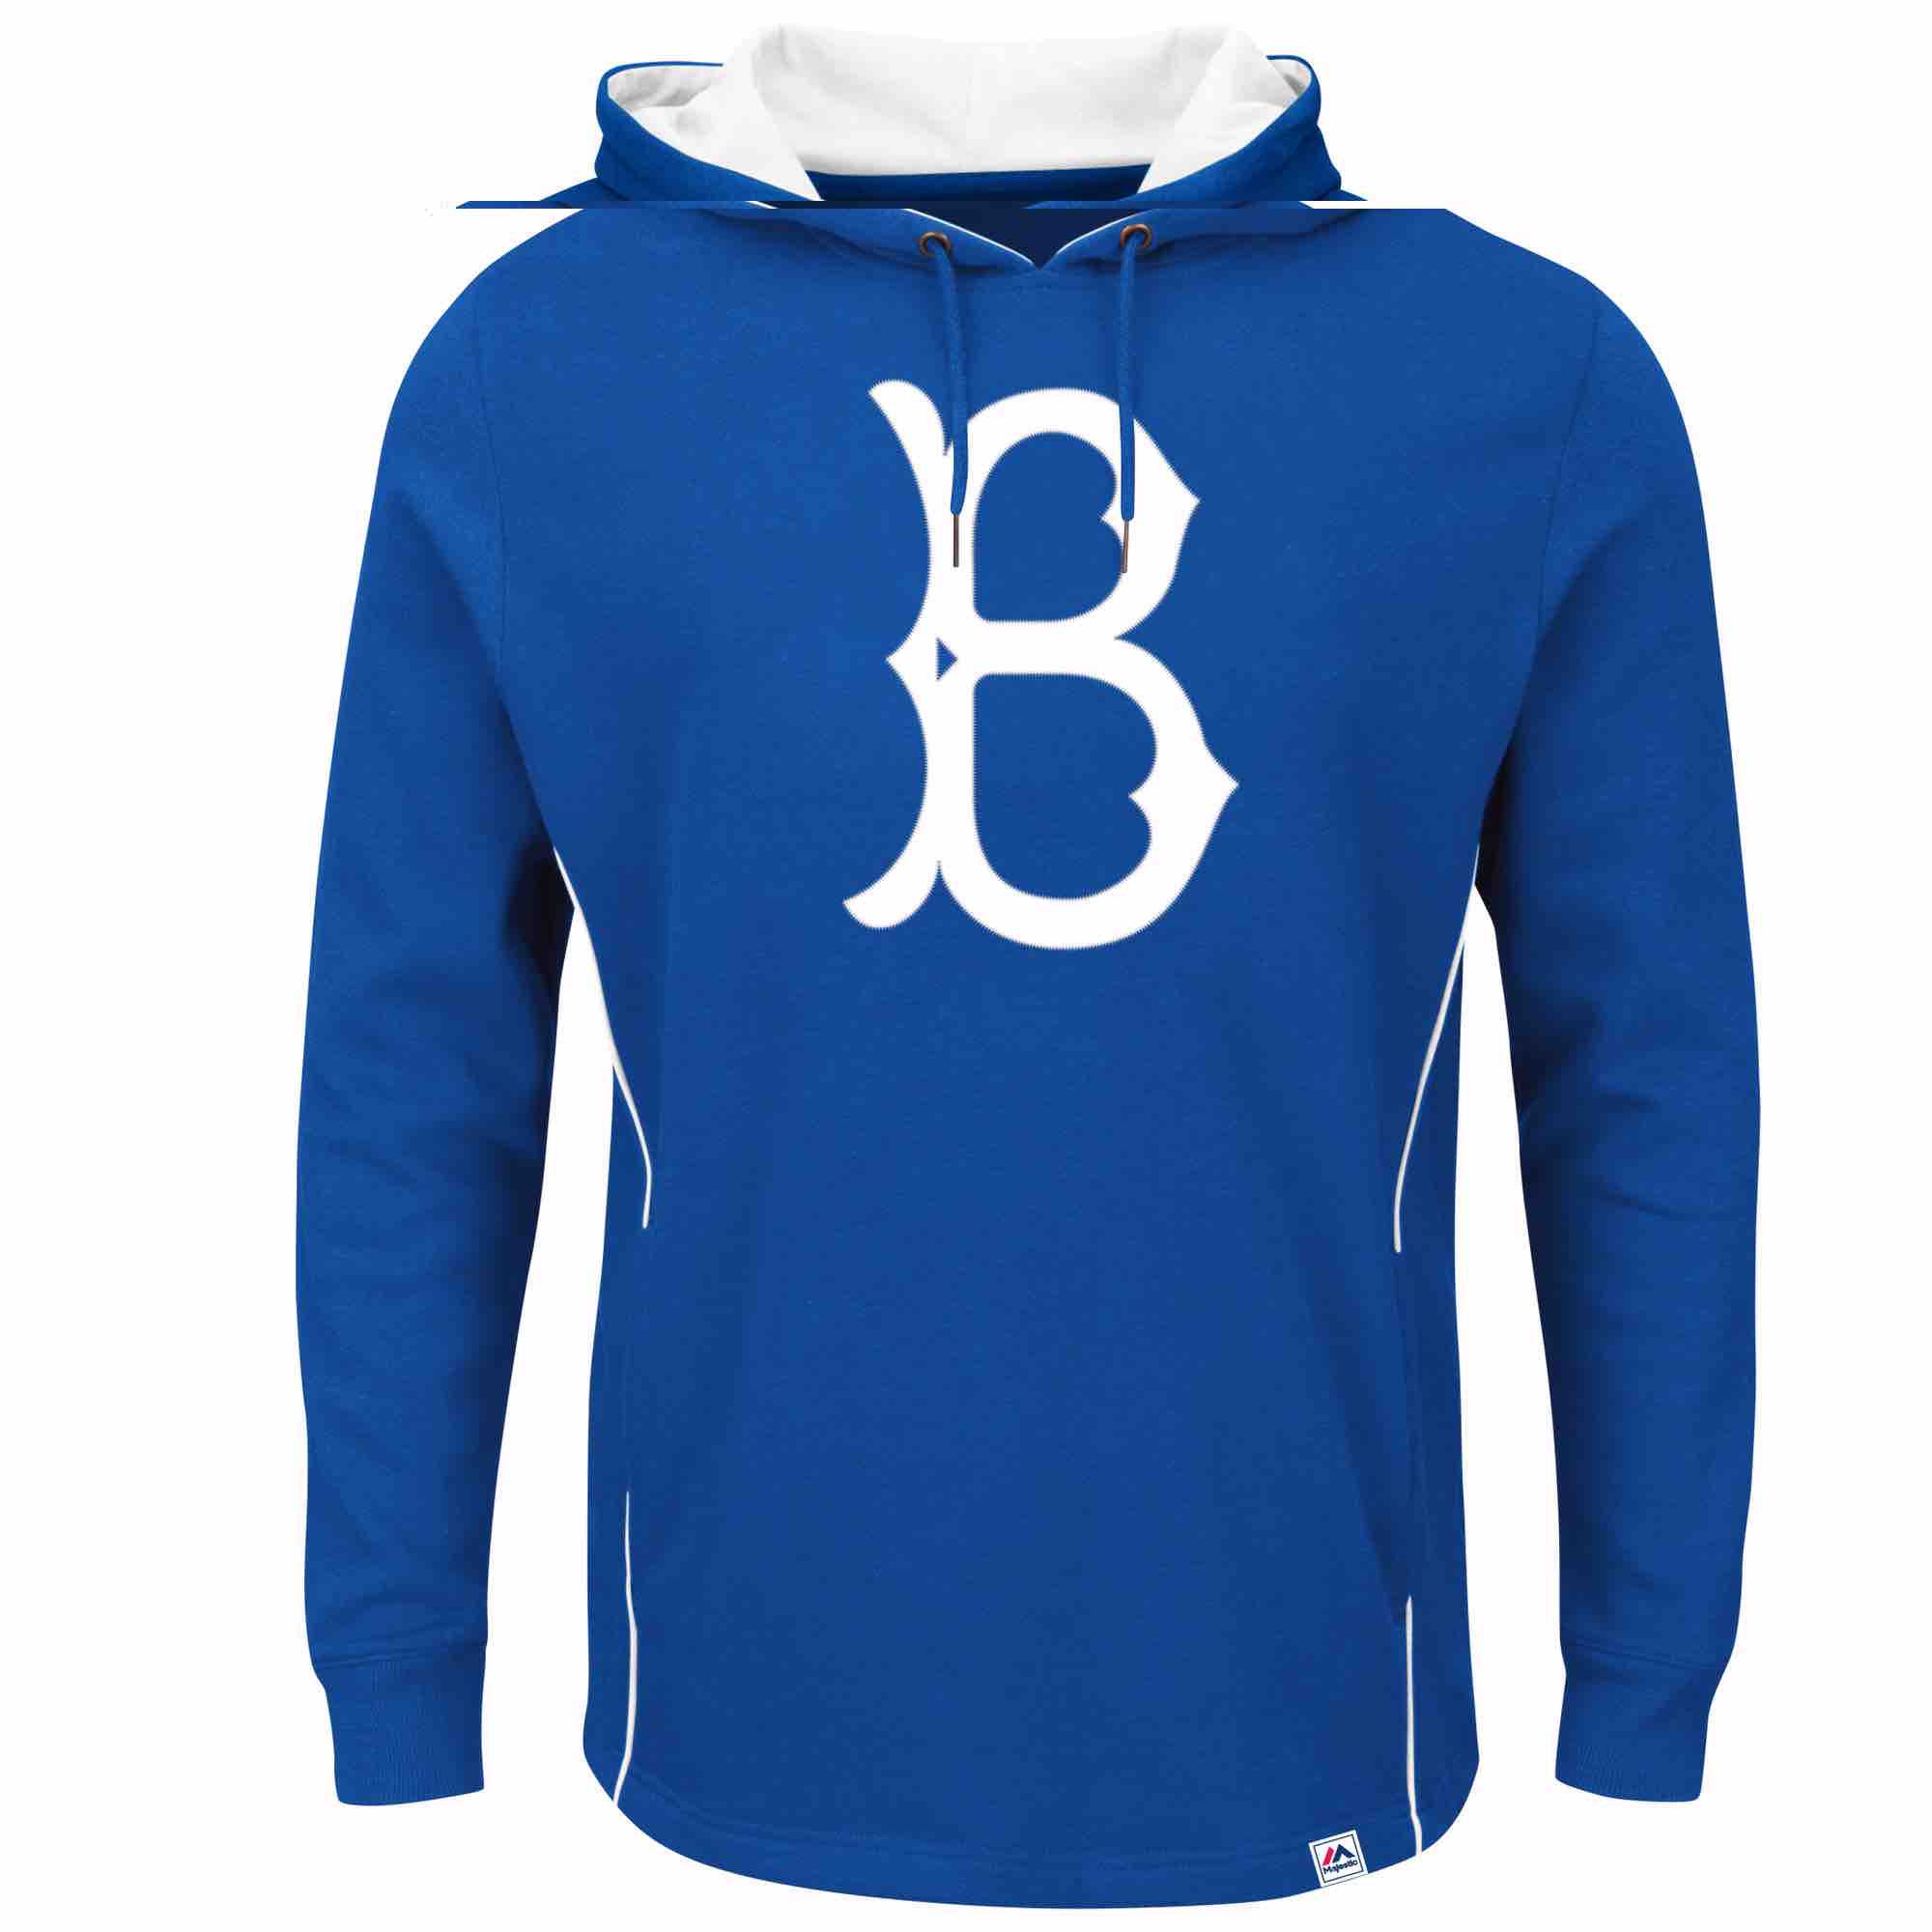 MLB Boston Red Sox Personalized Stitched Hoodie